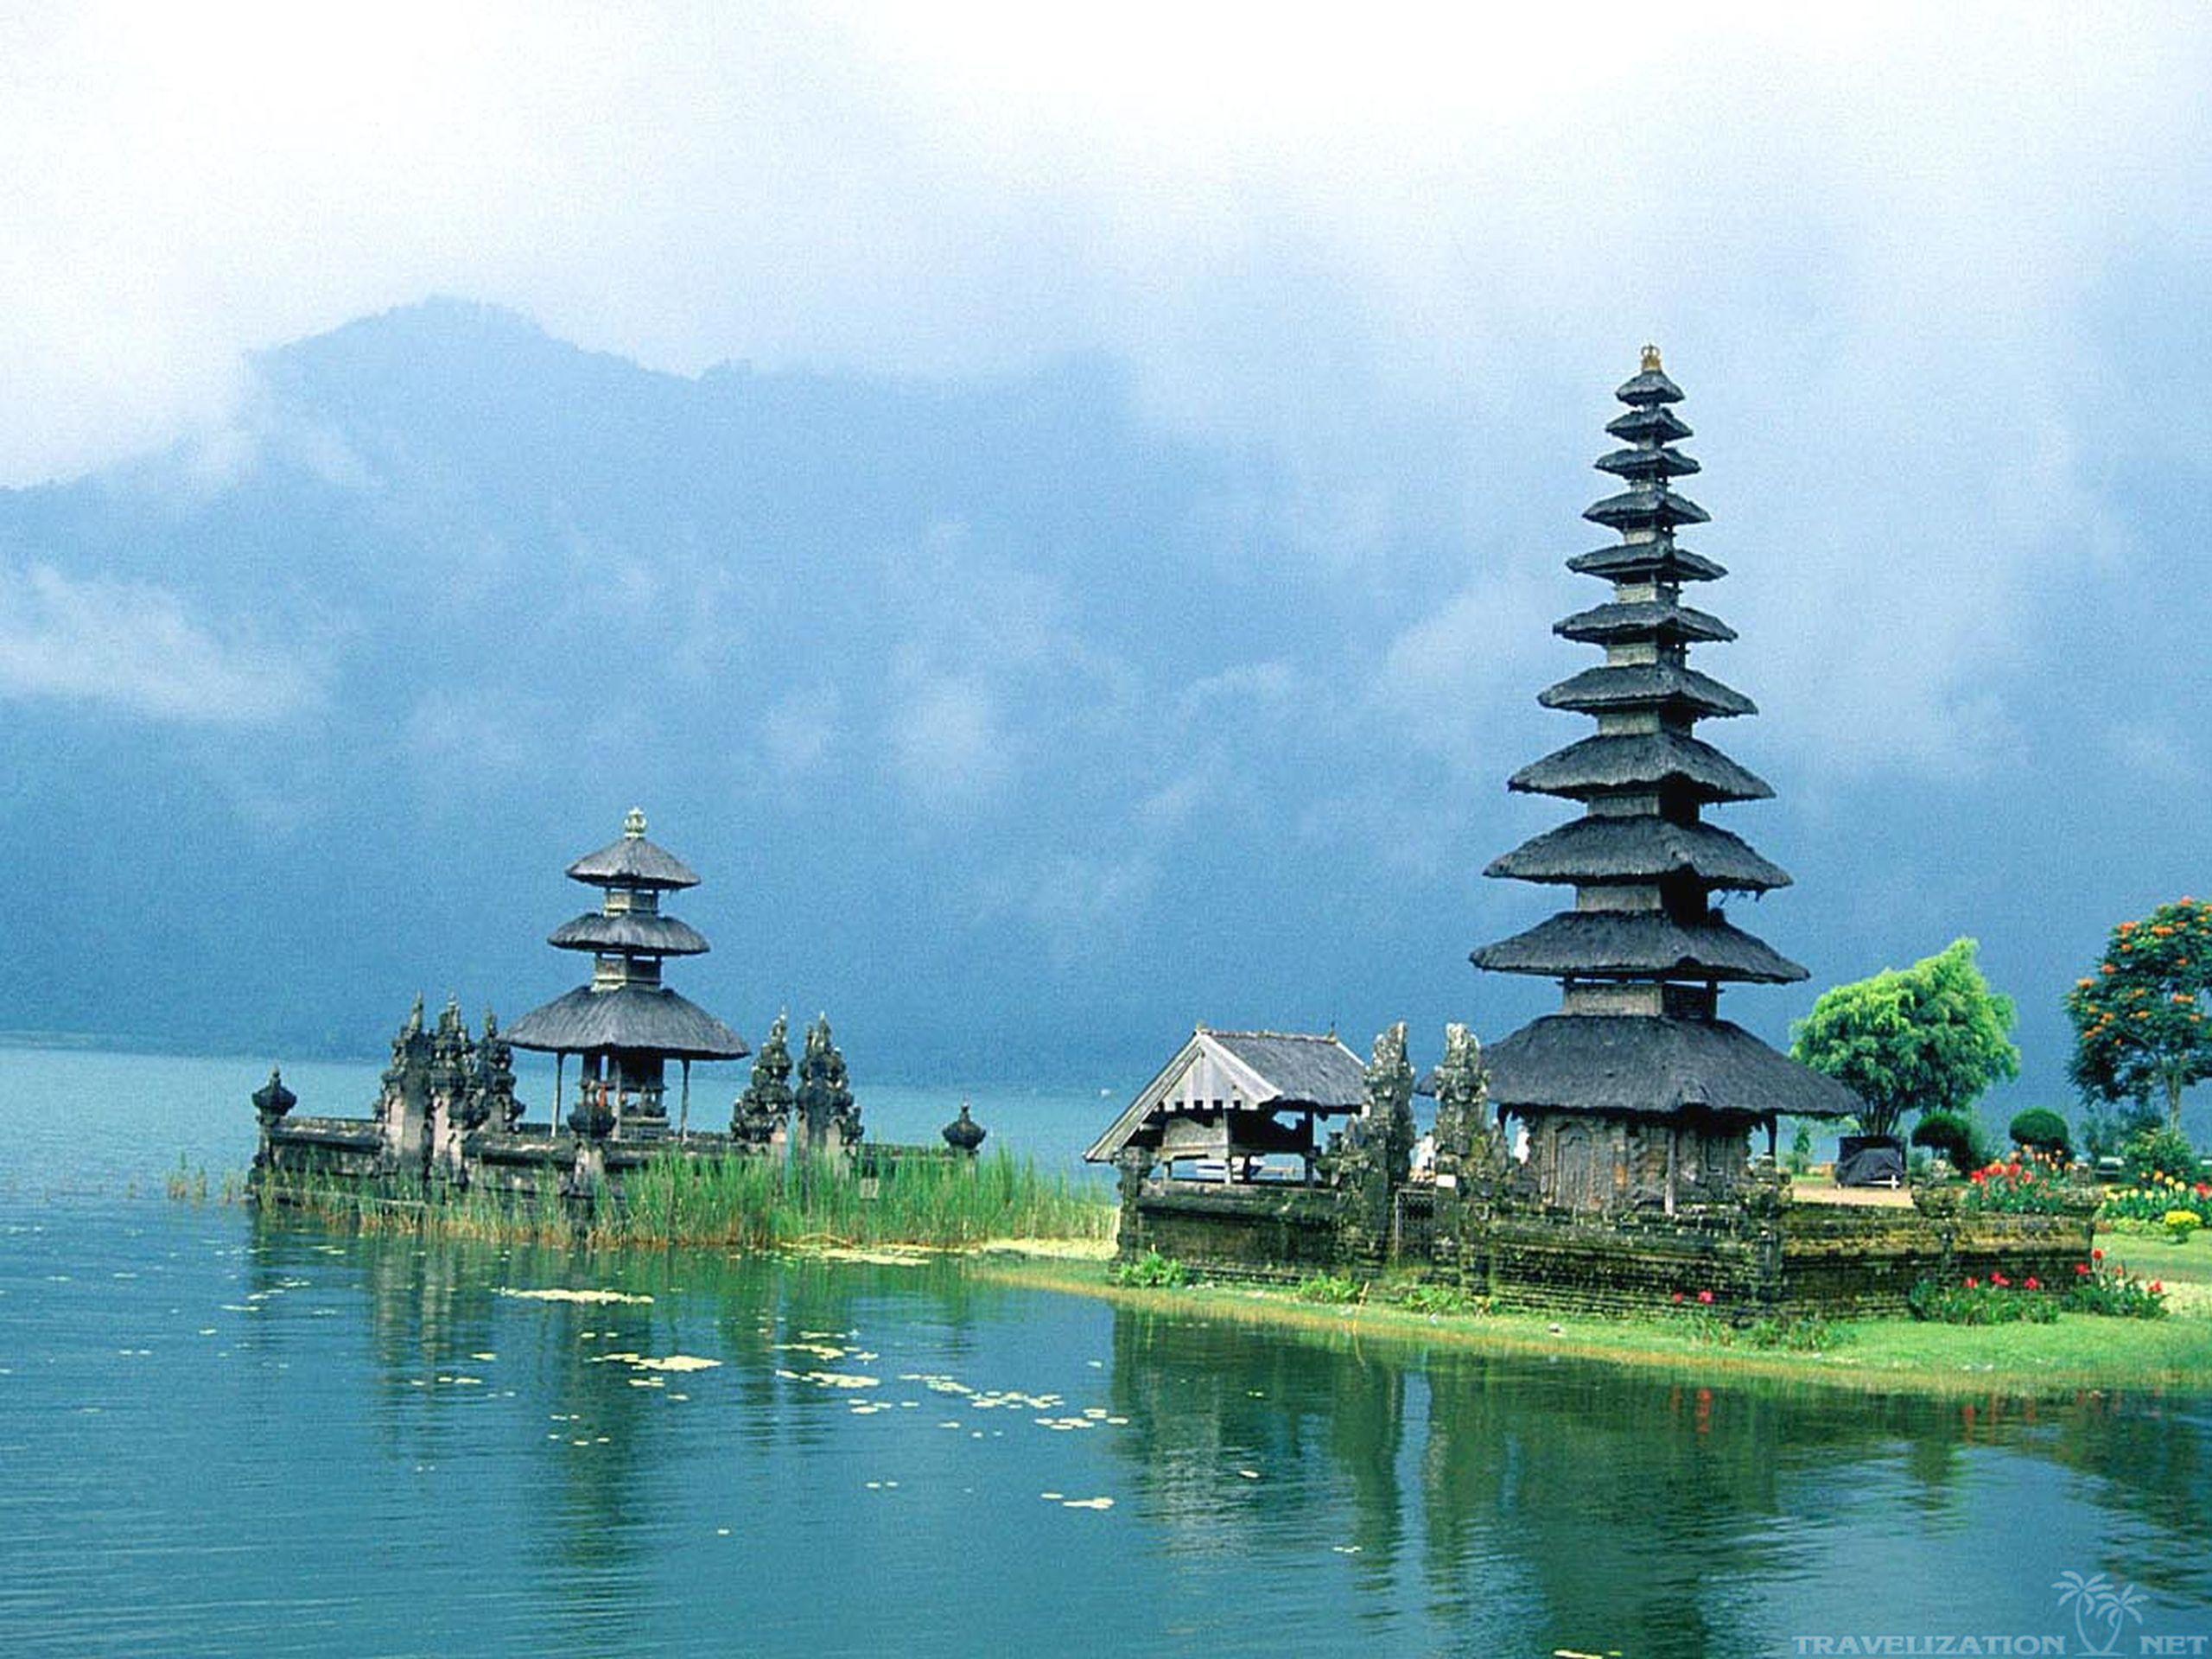 Temple of water in Bali wallpaper and image, picture